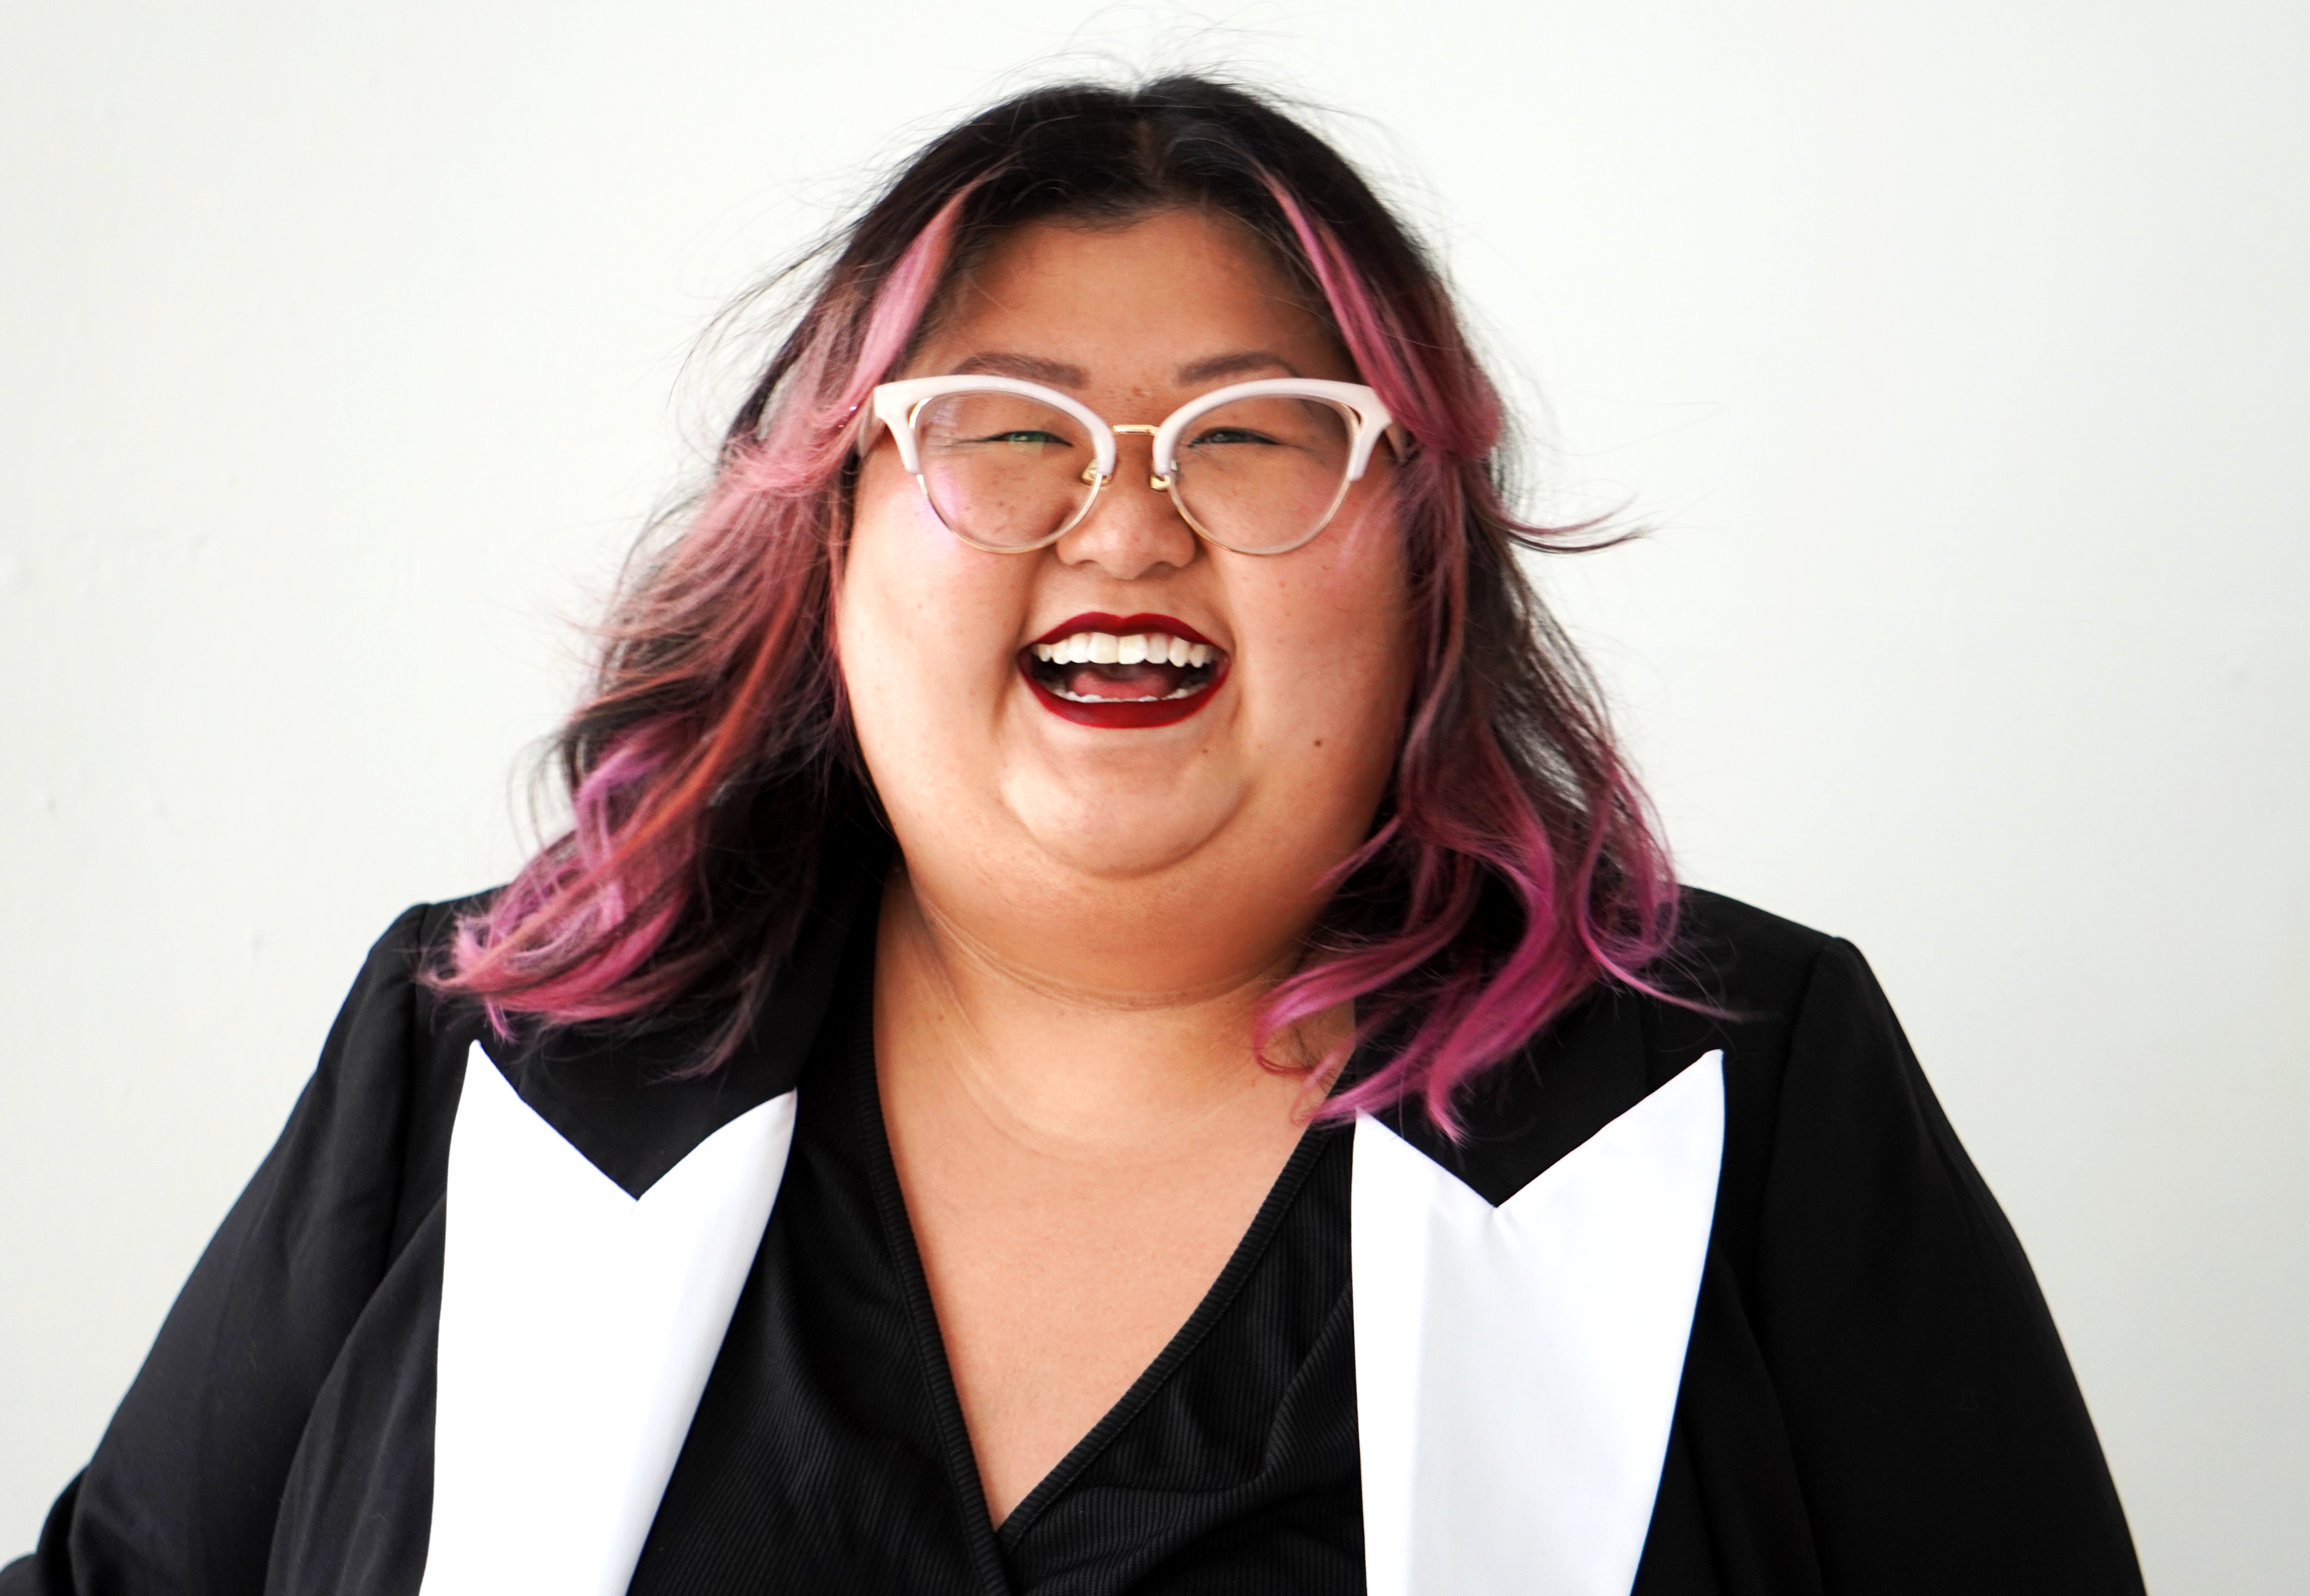 A smiling person of medium light skin tone with pink and black hair, wearing red lipstick and white rimmed cat eye glasses, and a black and white jacket.